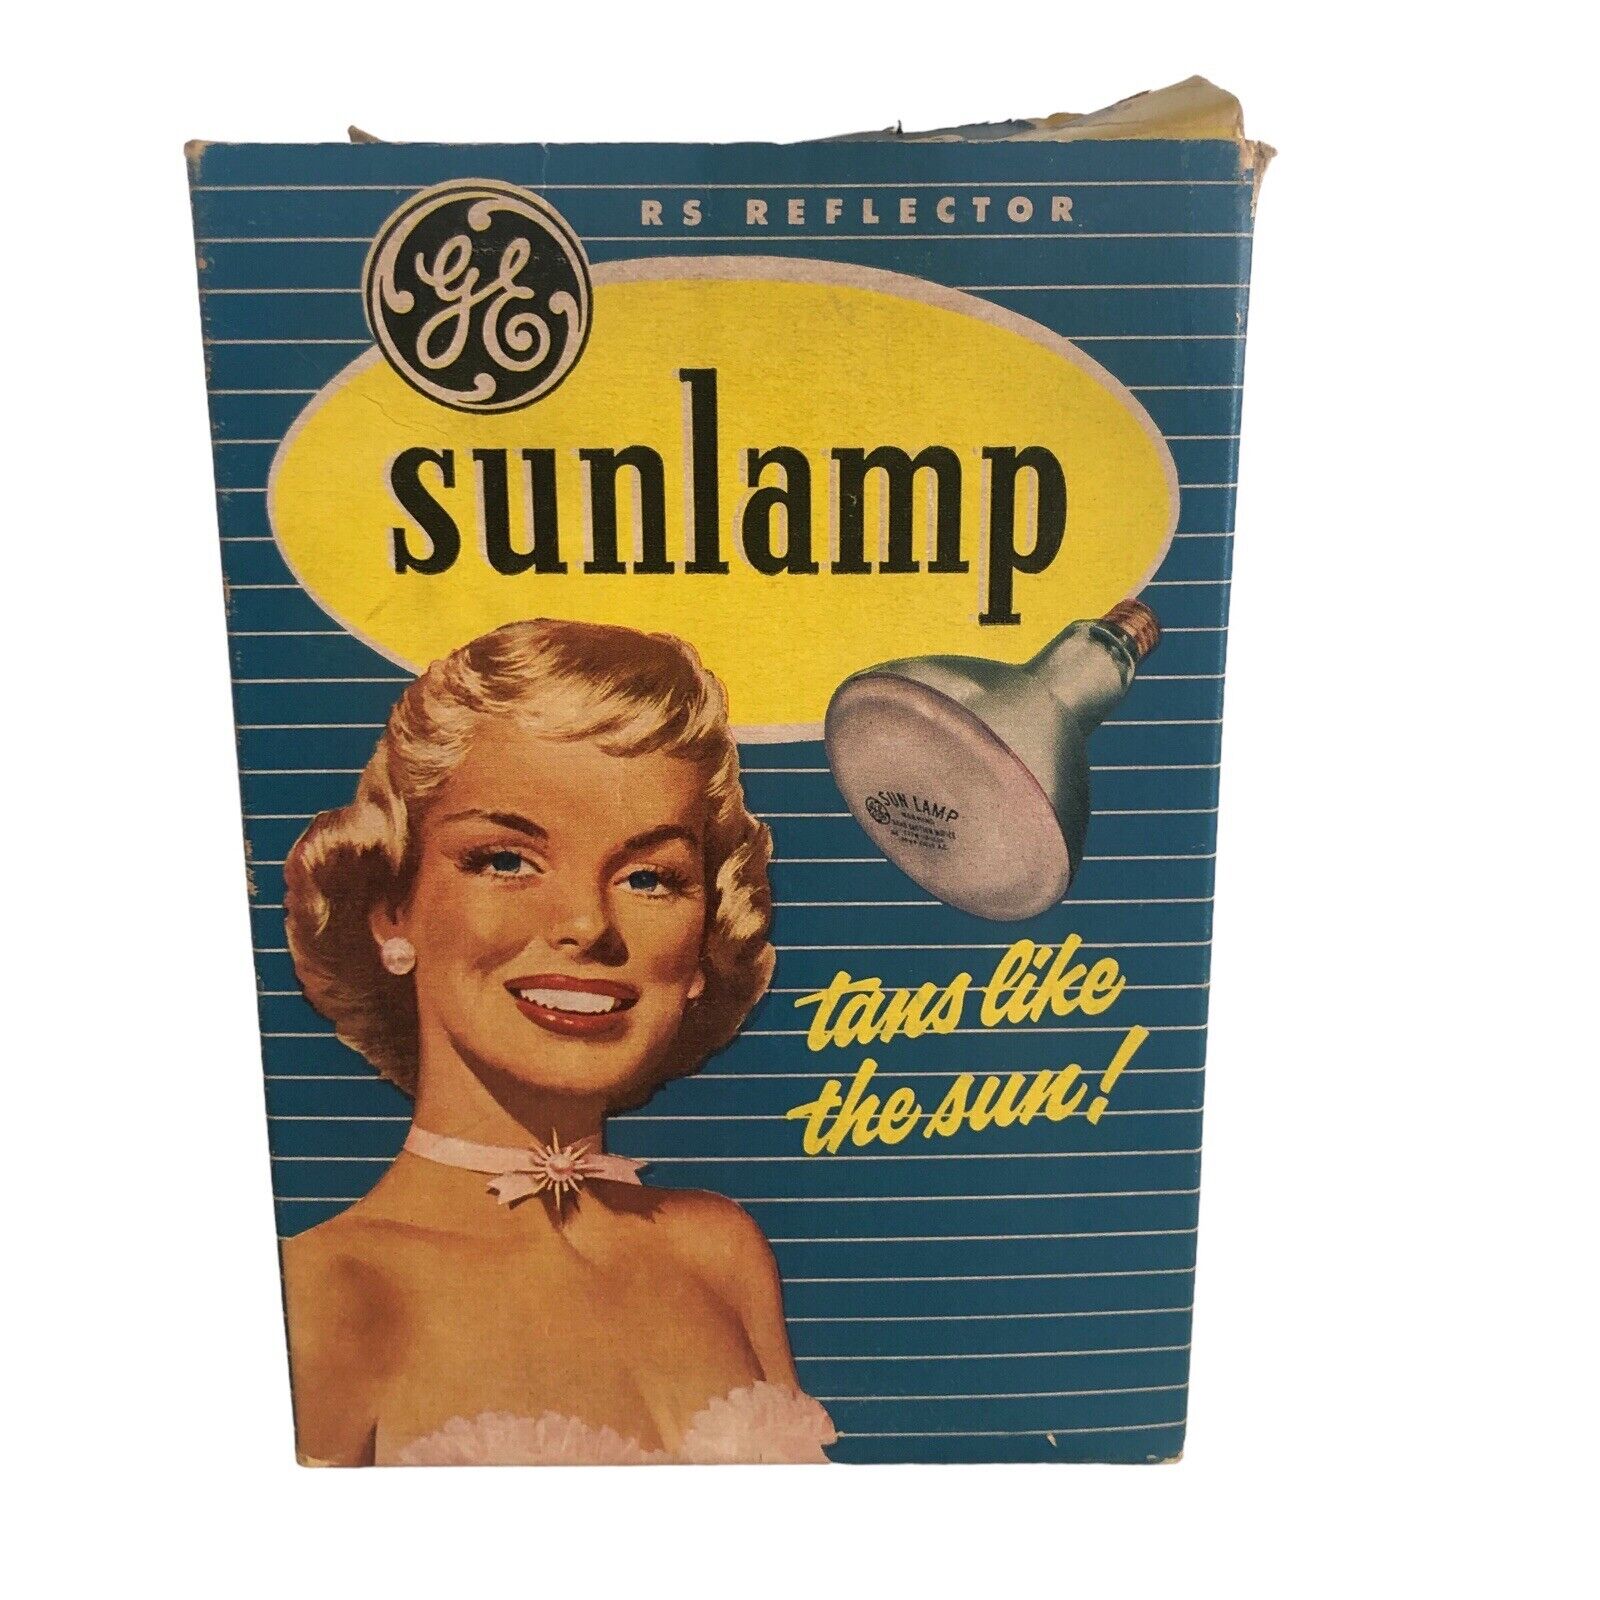 Vintage 1950s GE Sunlamp RS Reflector Sunlamp Replacement Bulb w/ Box